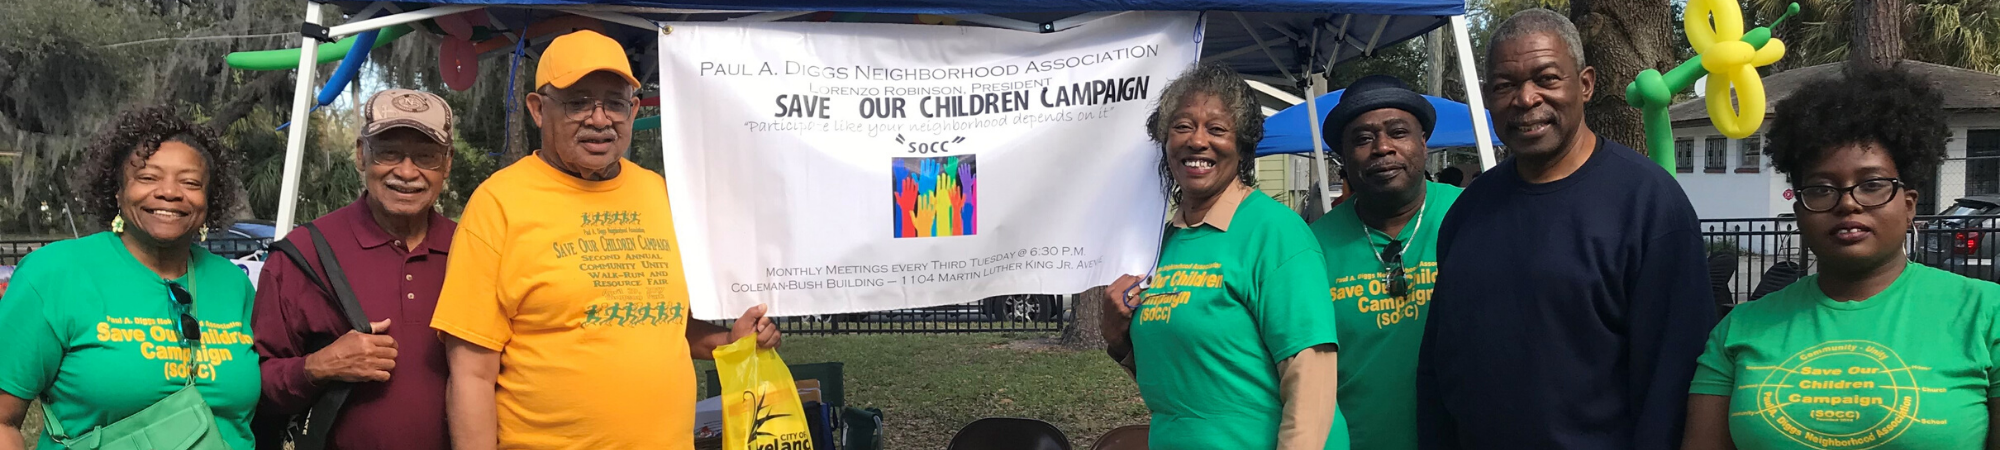 Save our children booth with neighborhood leaders